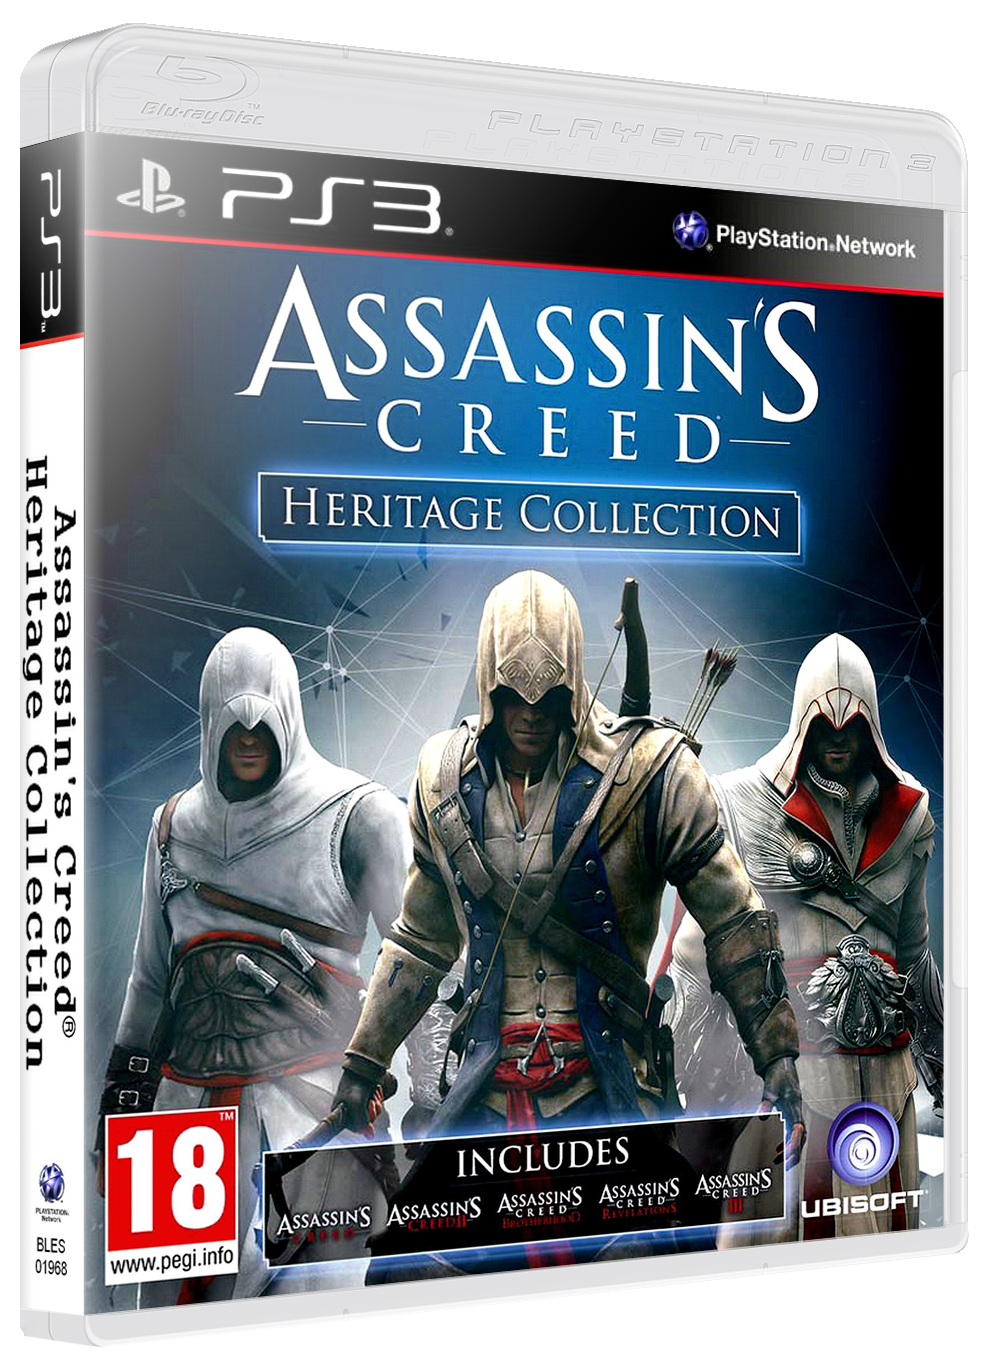 Assassin's Creed: Heritage Collection Images - LaunchBox Games Database